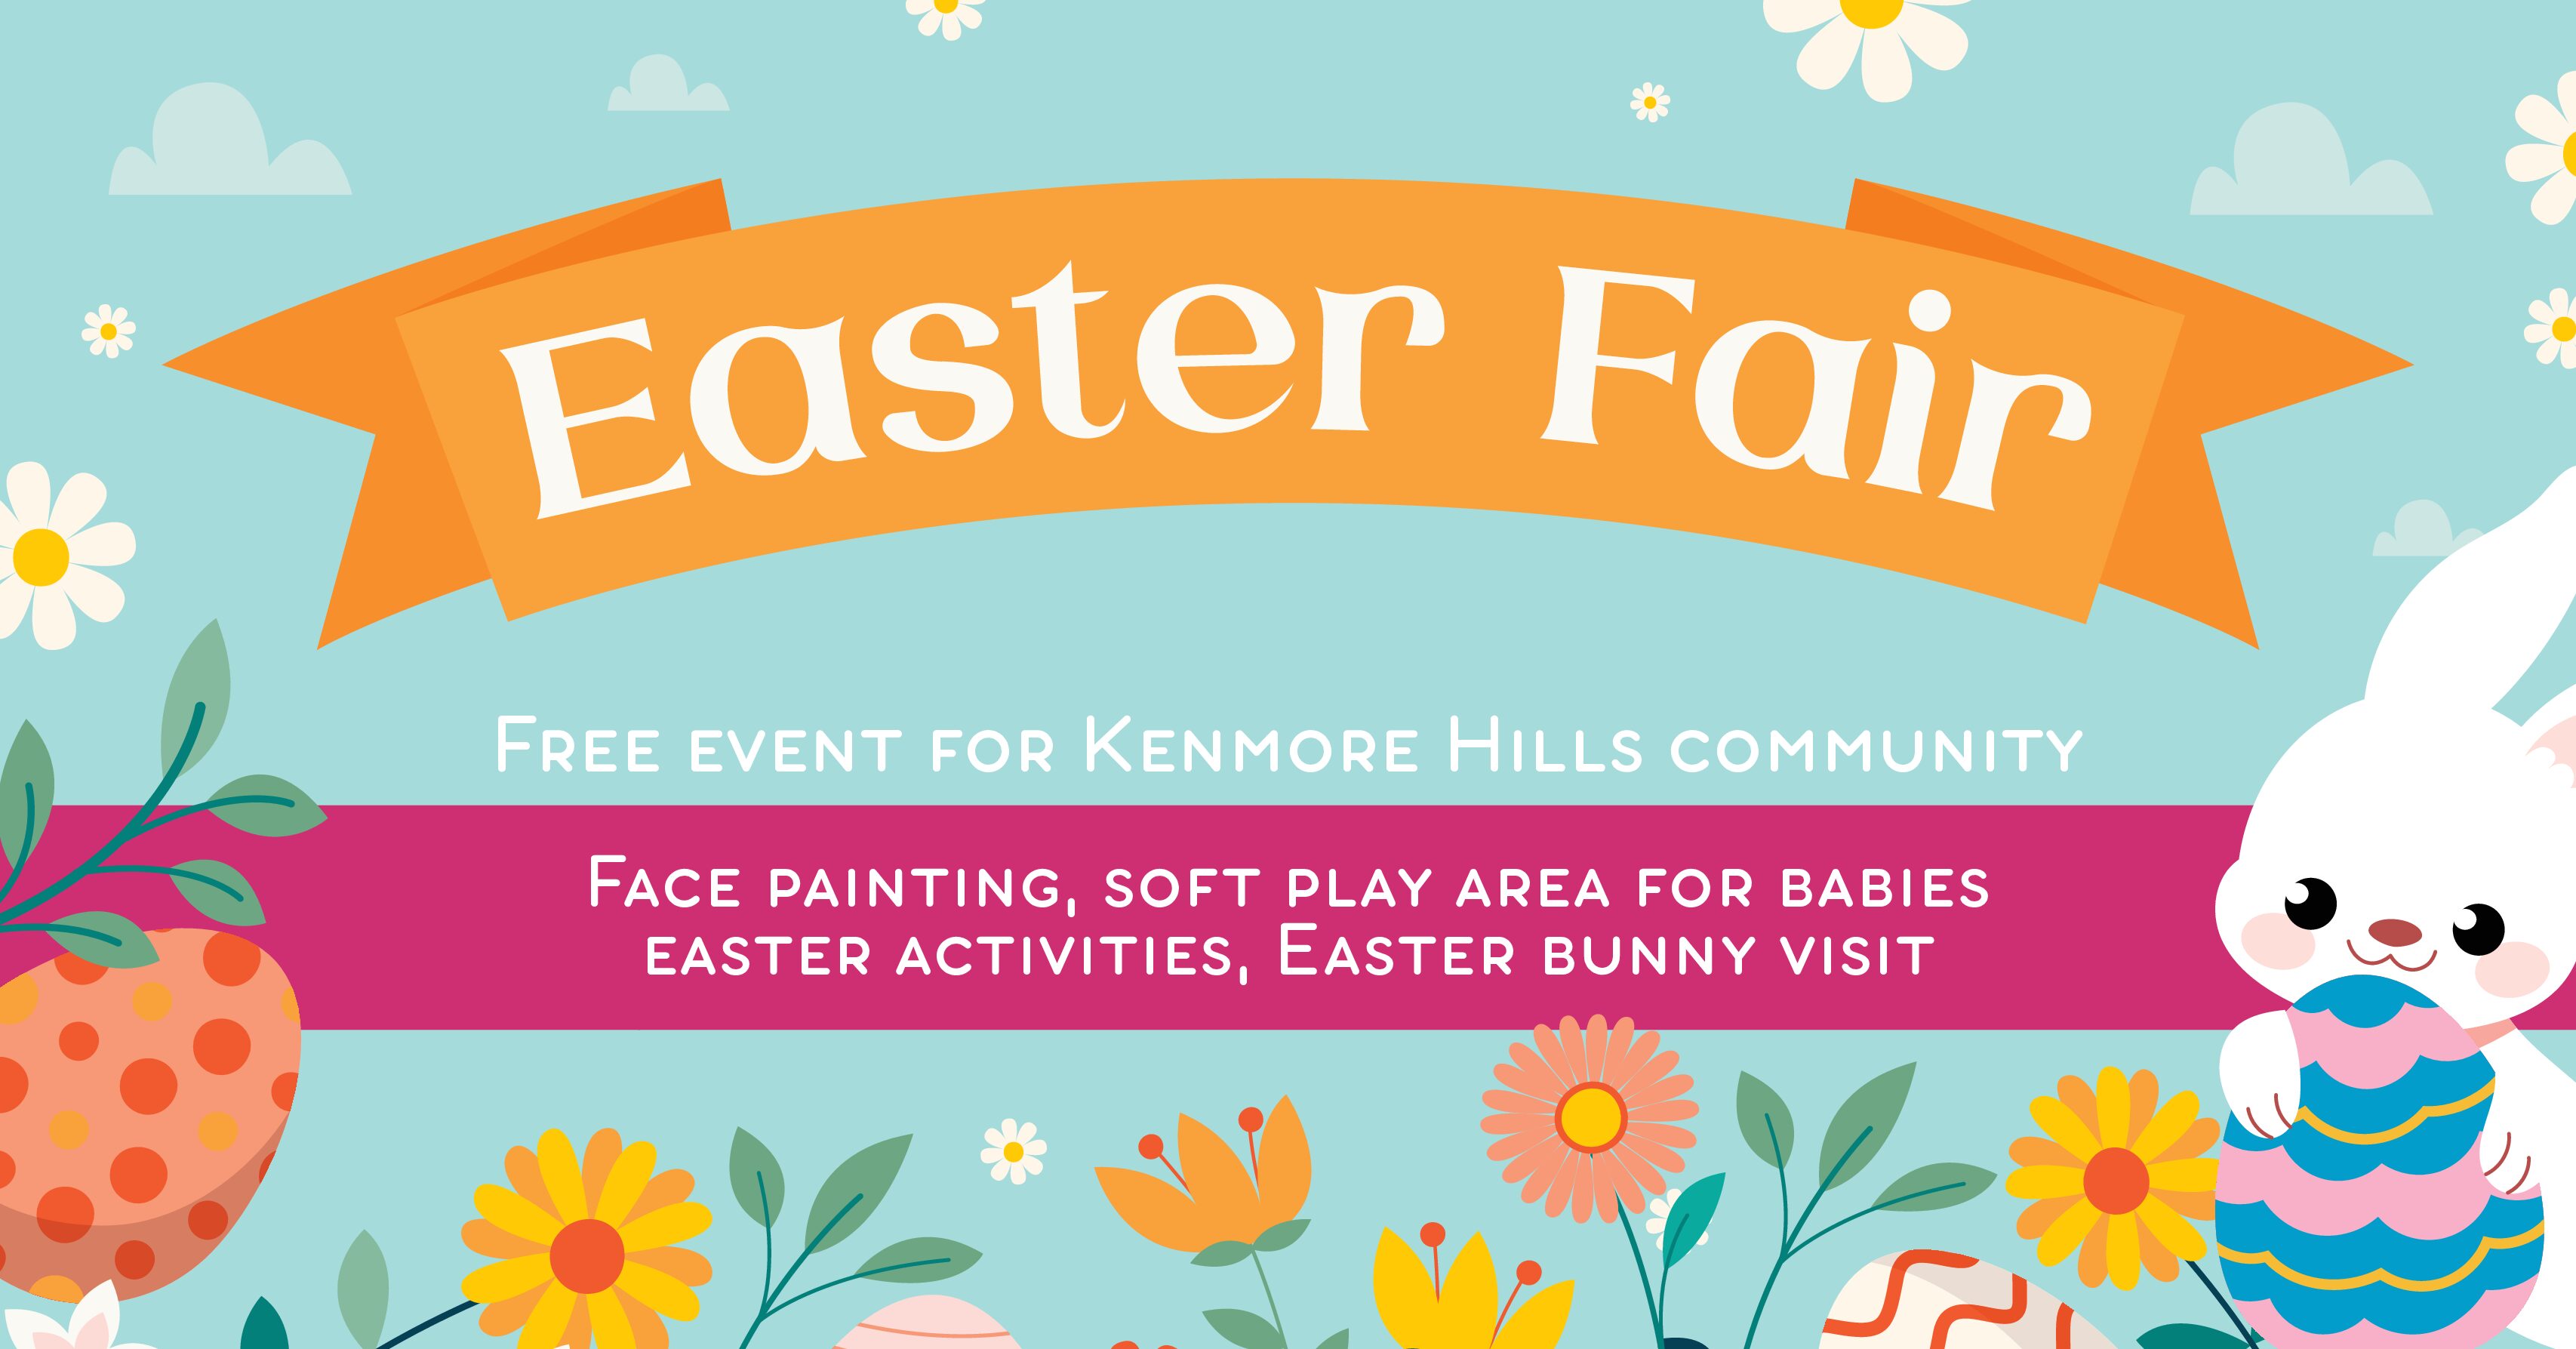 Easter Fair FREE event for the Kenmore Hills community